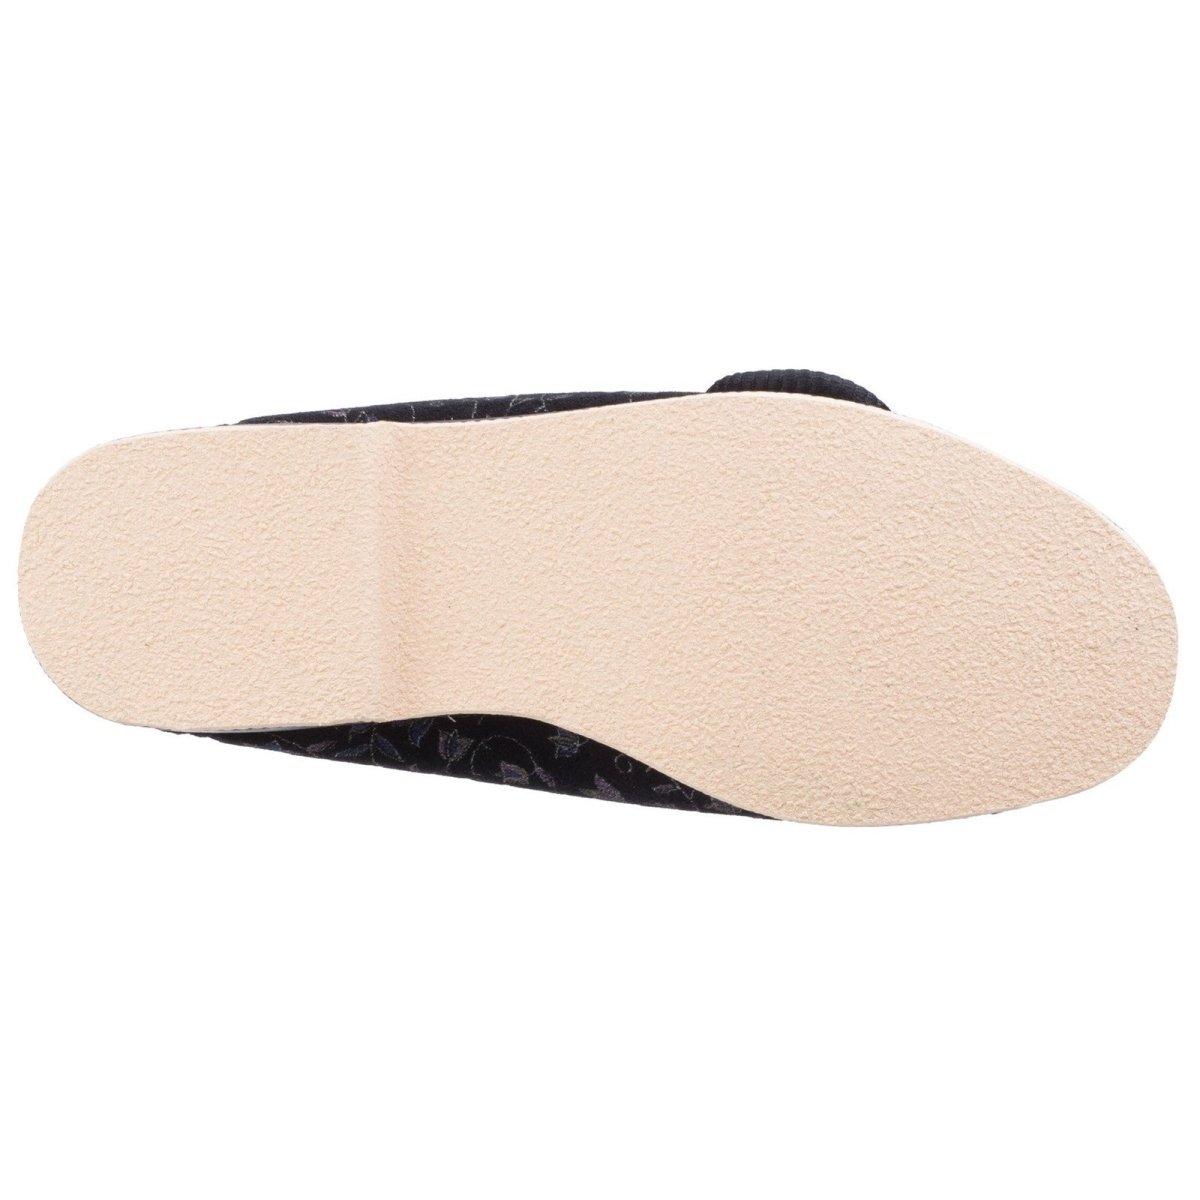 GBS Nola Extra Wide Fit Ladies Slipper - Shoe Store Direct